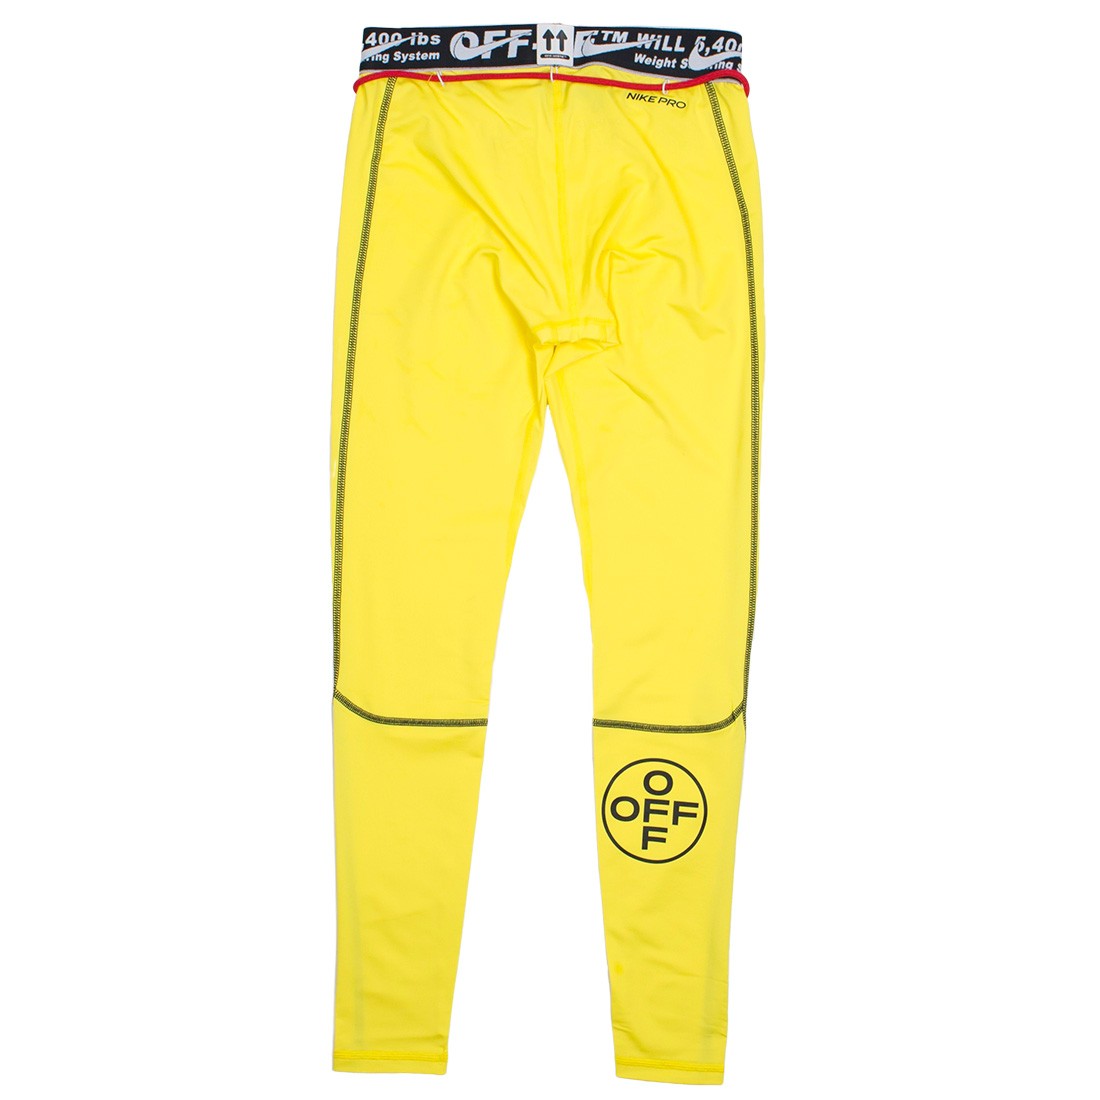 Nike X Off-white Running Tights in Yellow